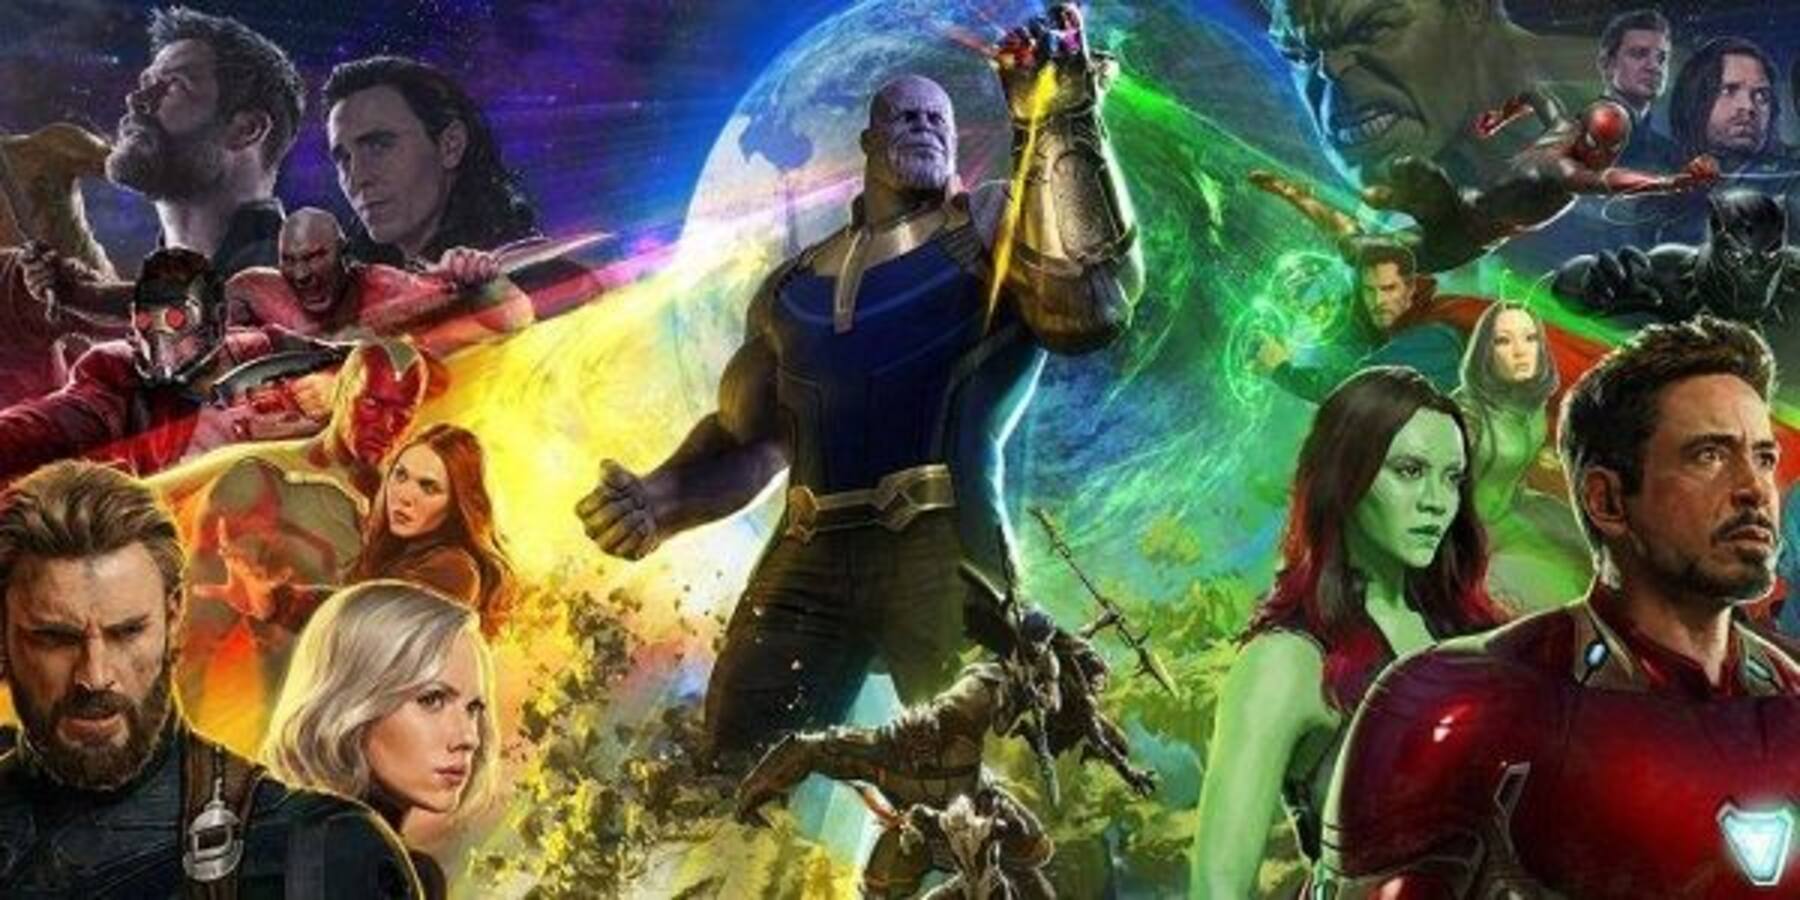 Avengers Infinity War box office collection day 10: The Marvel movie has a  massive second weekend in India; earns Rs  crore - Bollywood News &  Gossip, Movie Reviews, Trailers & Videos